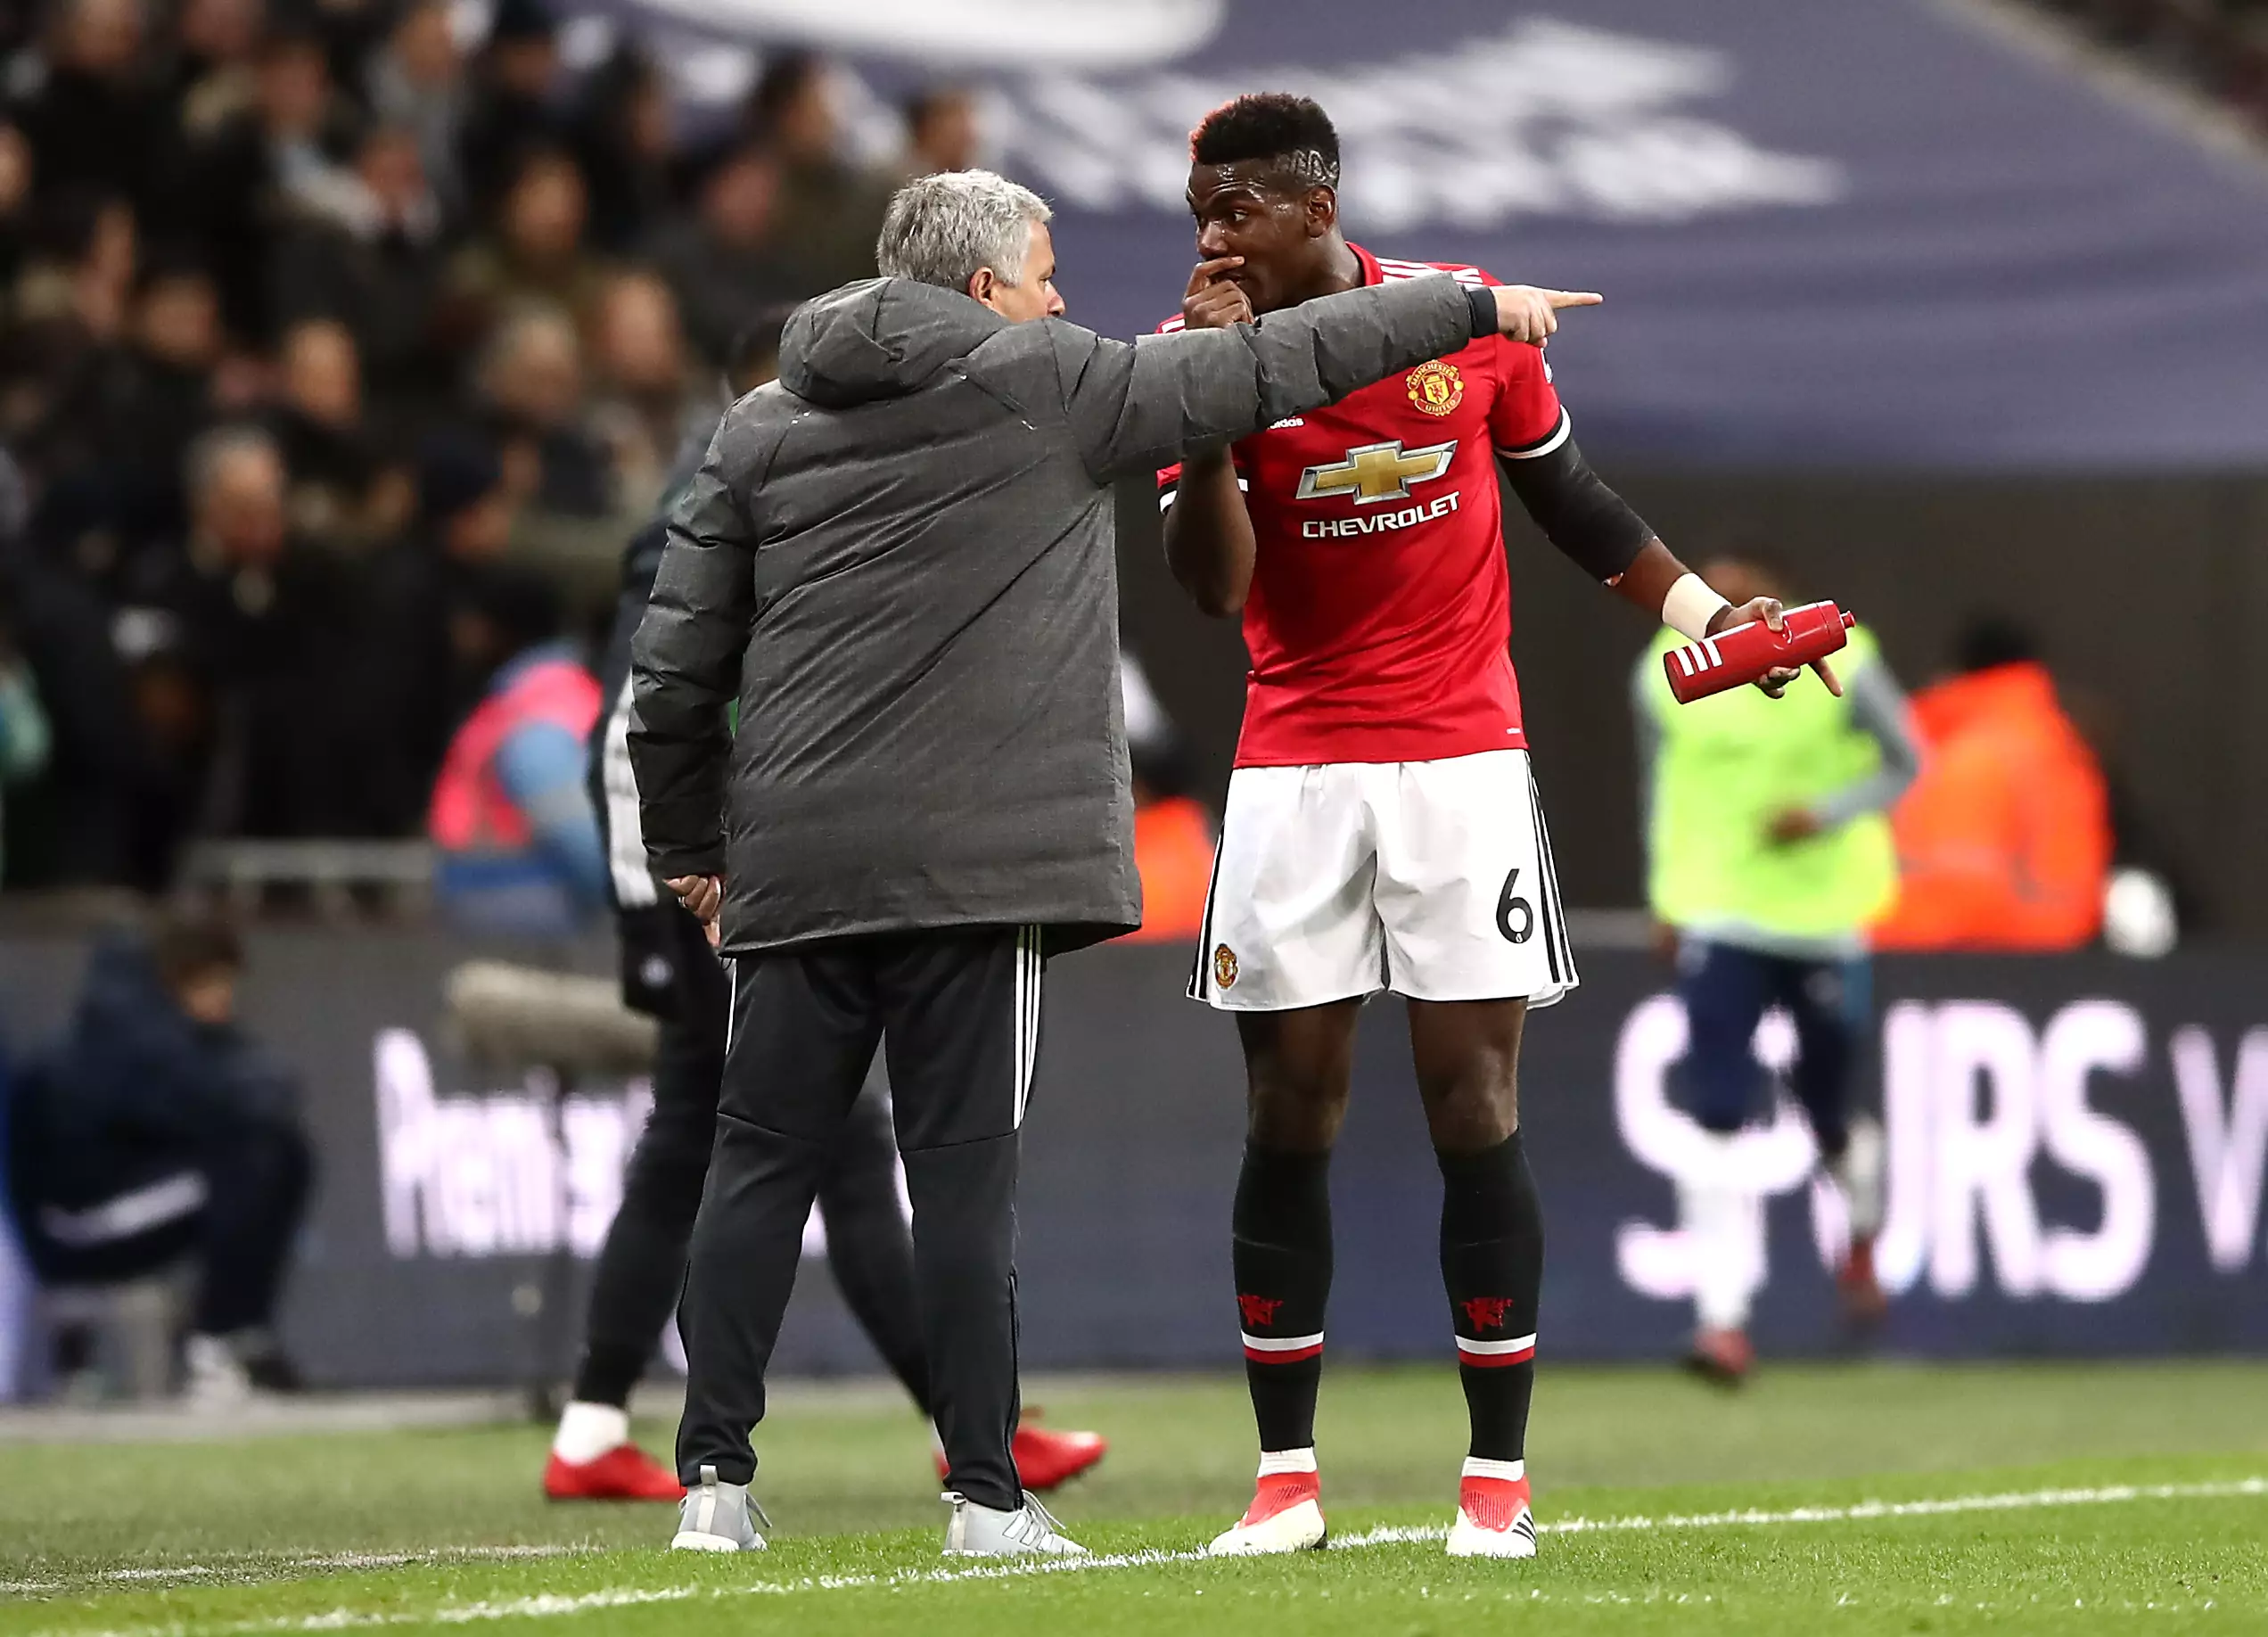 Mourinho and Pogba exchange words on the touchline. Image: PA